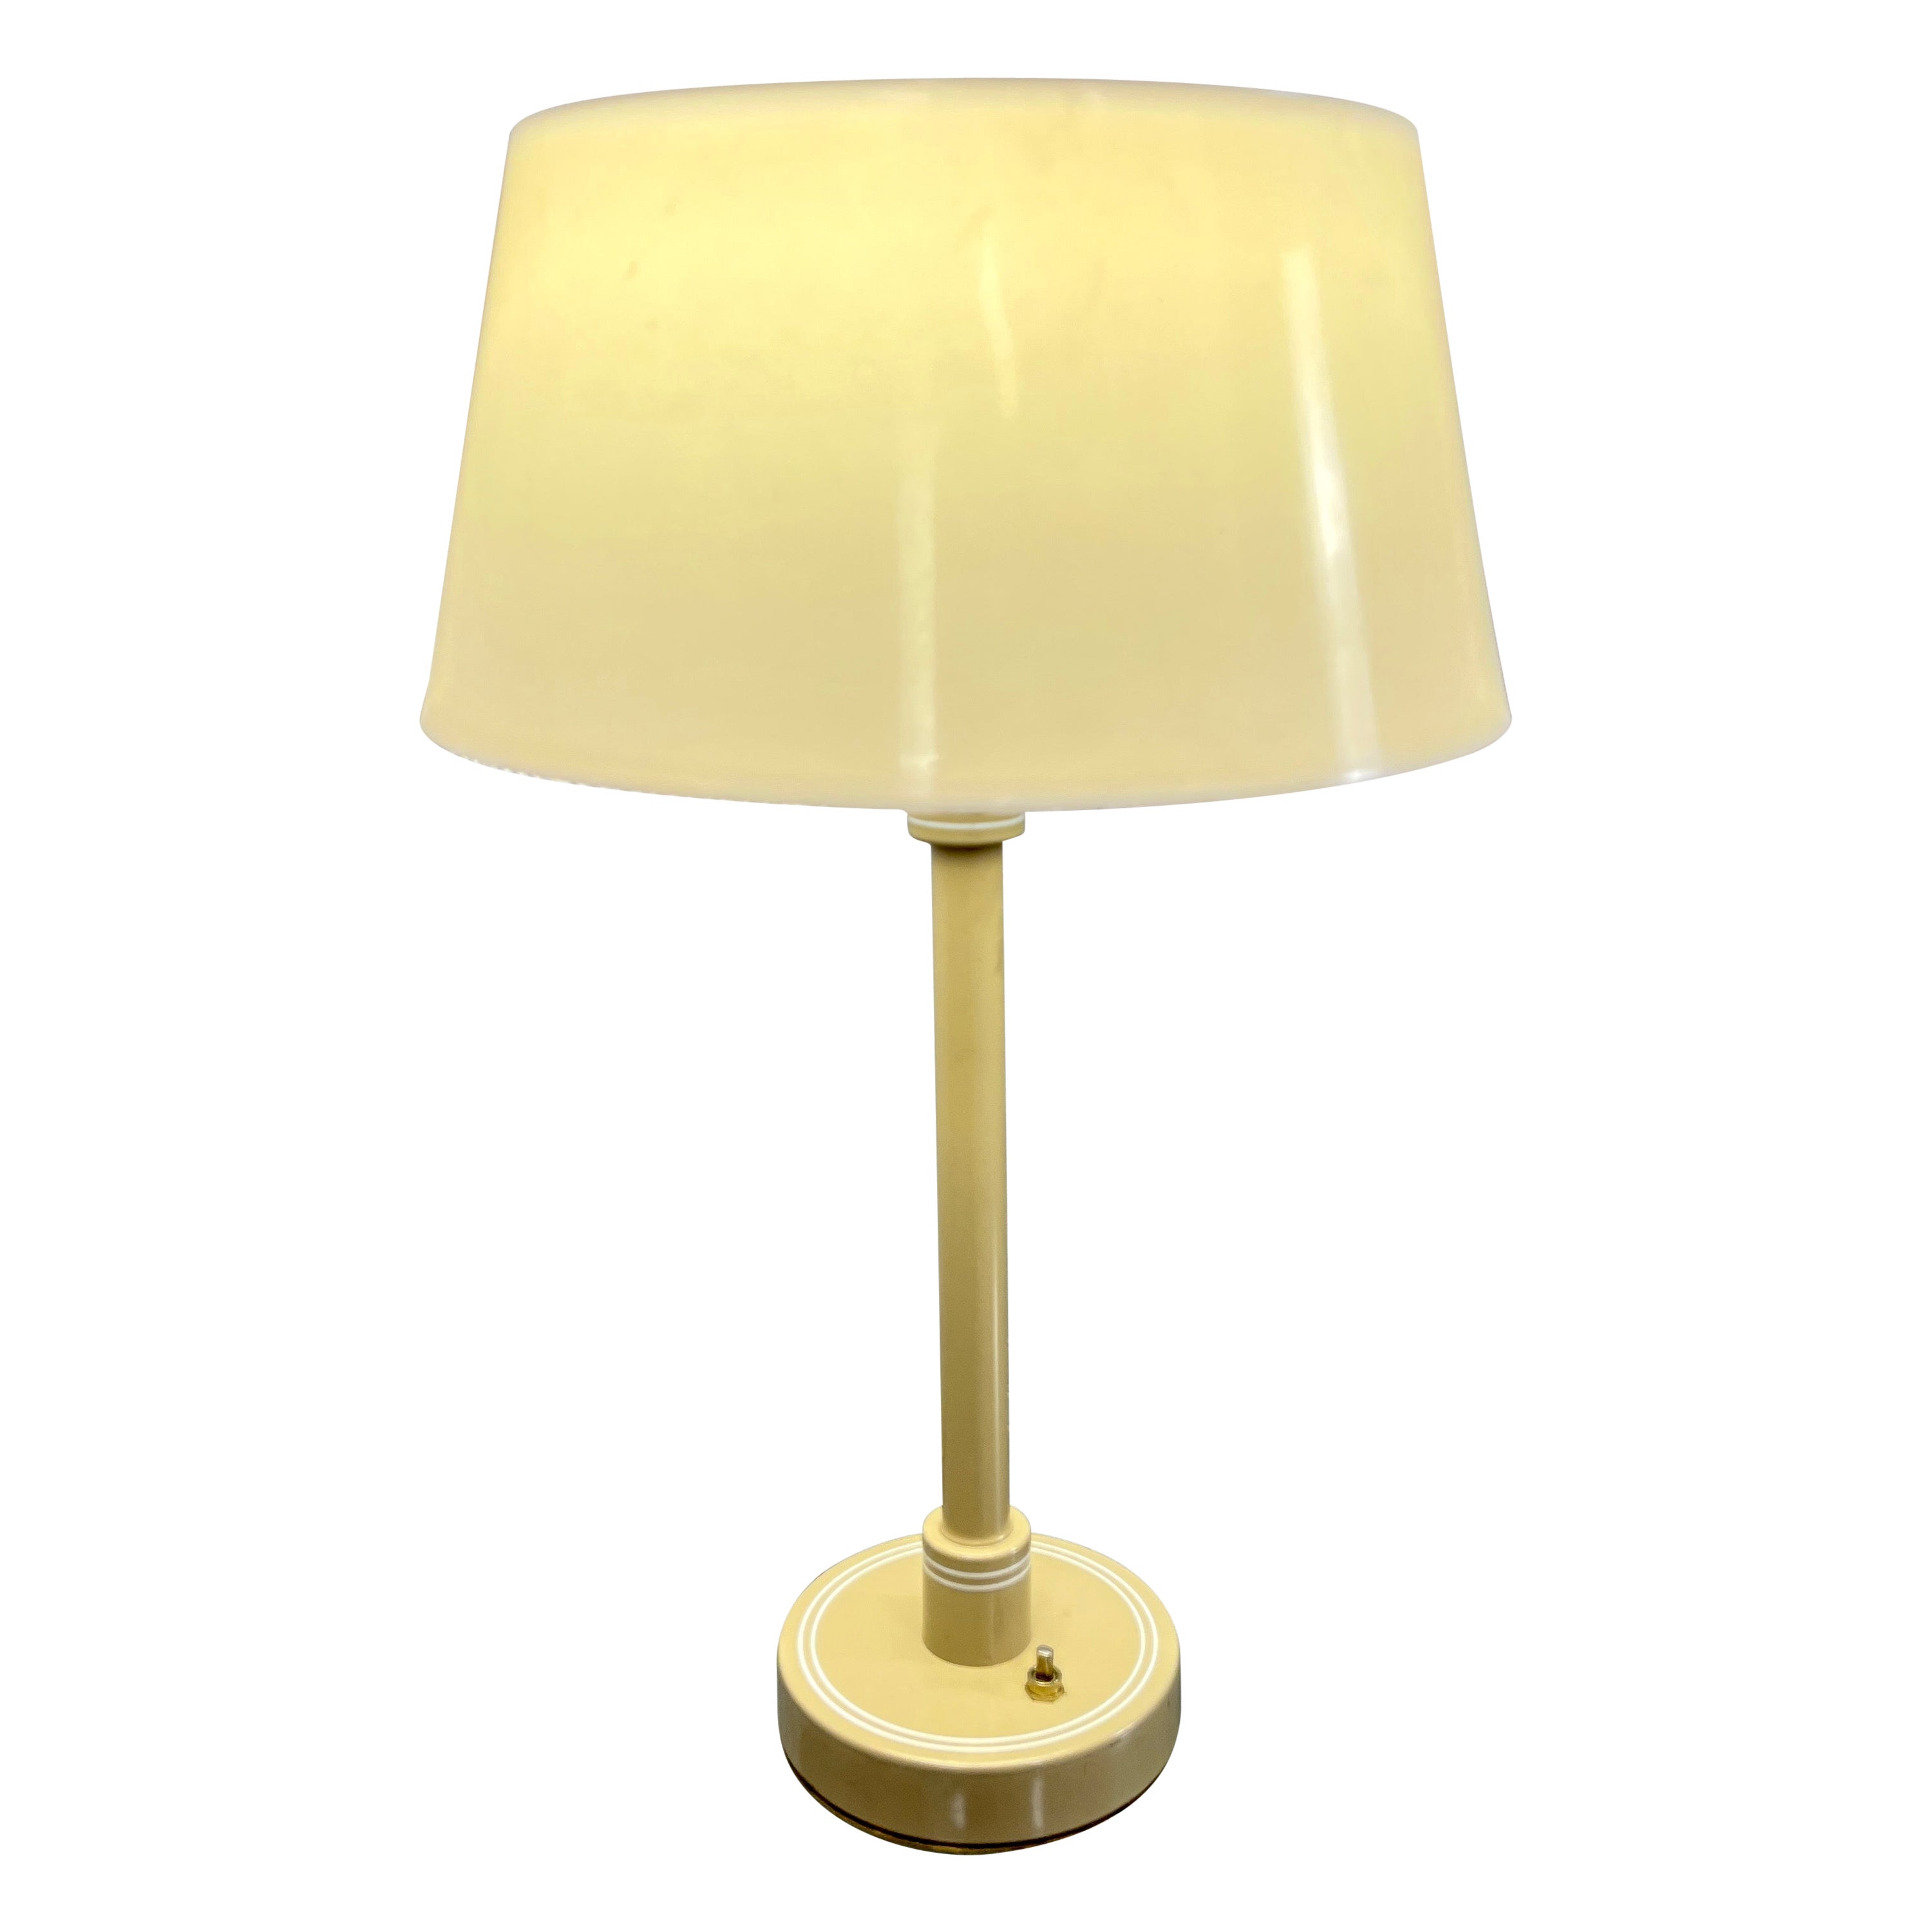 1960s Plastic Drum Shade Table Lamp For Sale